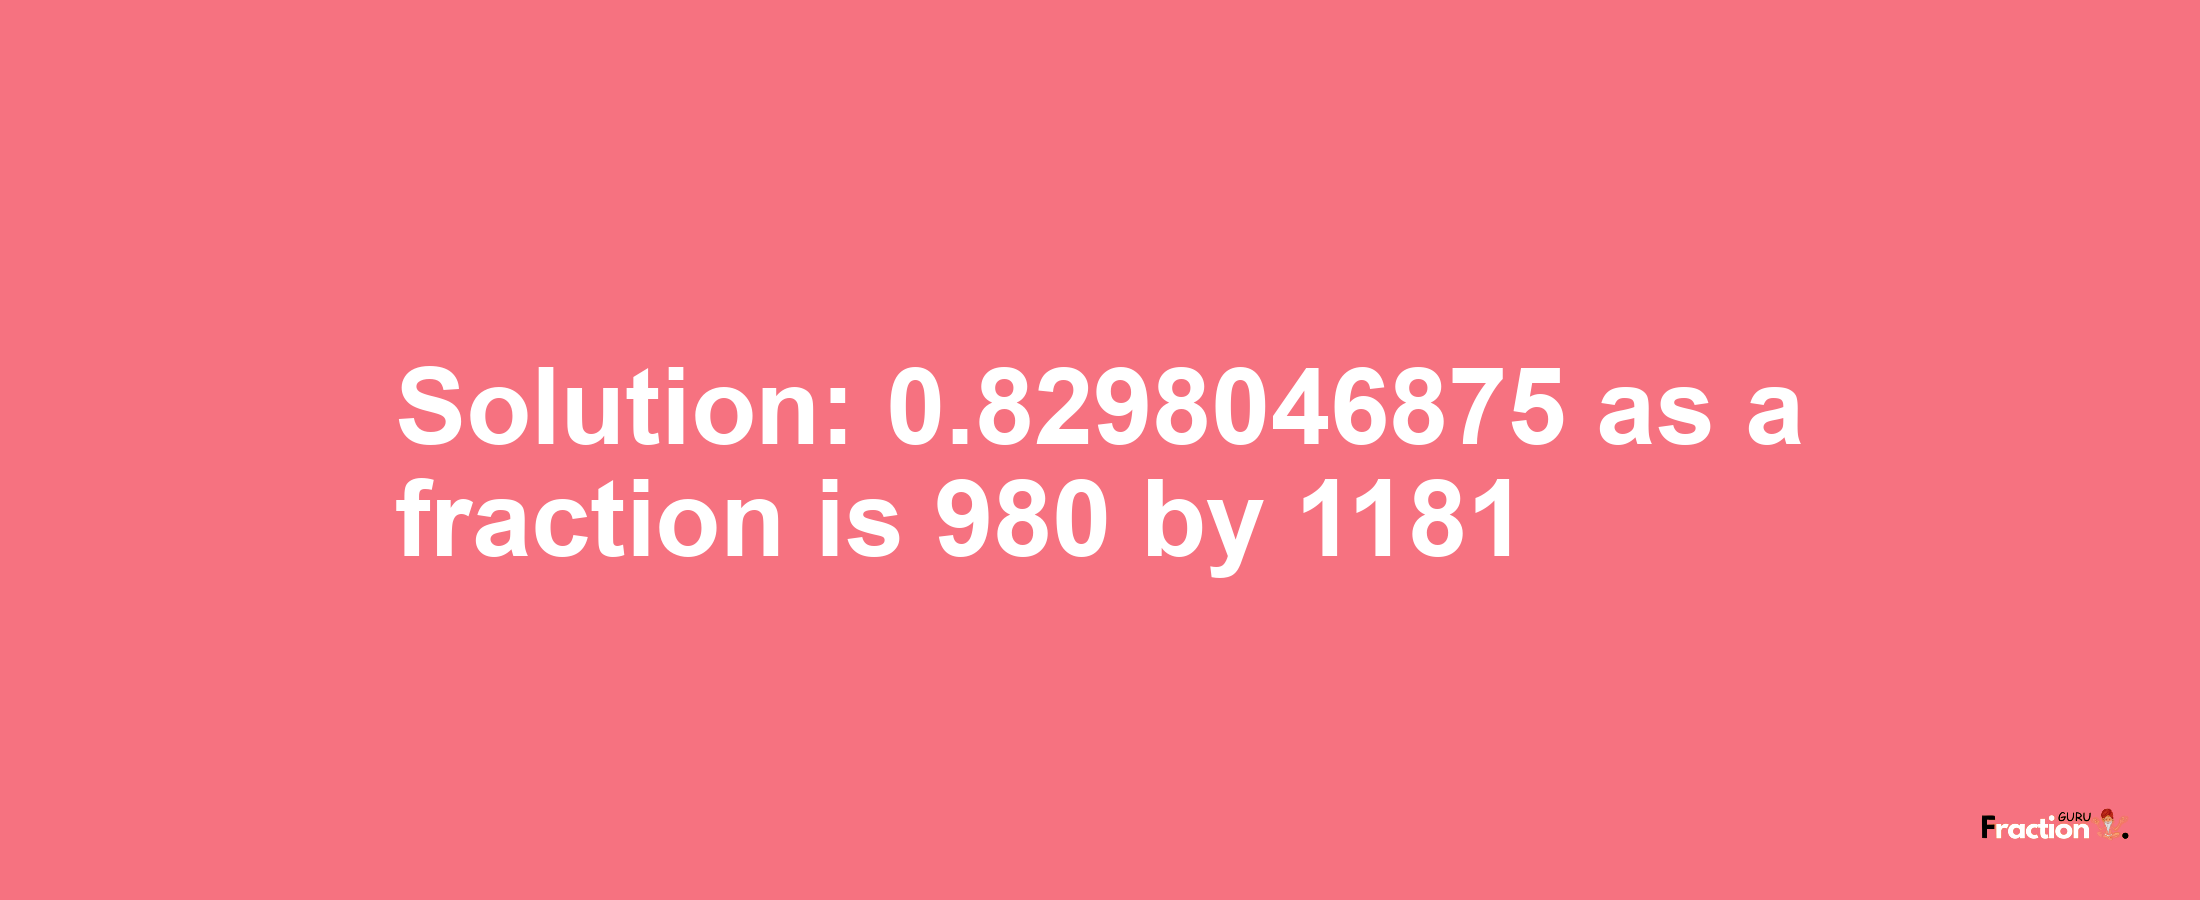 Solution:0.8298046875 as a fraction is 980/1181